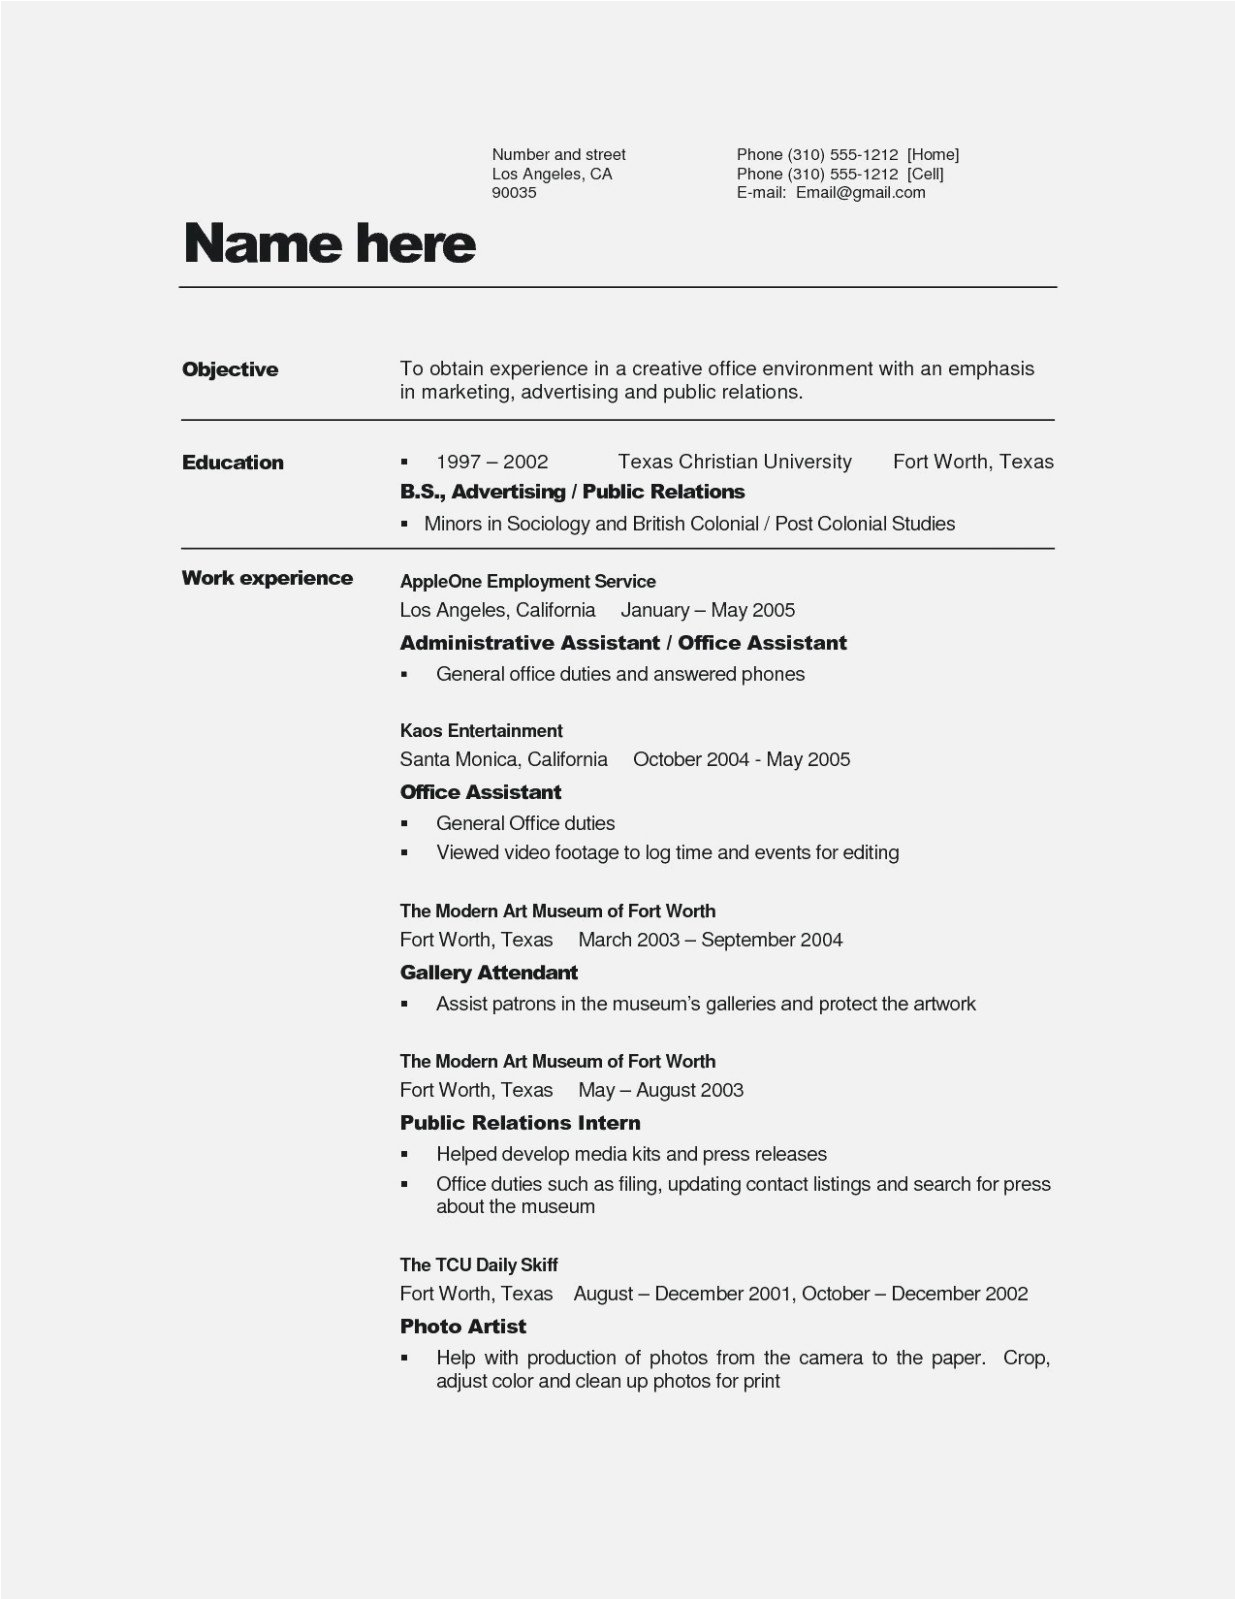 Free Quick and Easy Resume Template Quick and Easy Resume